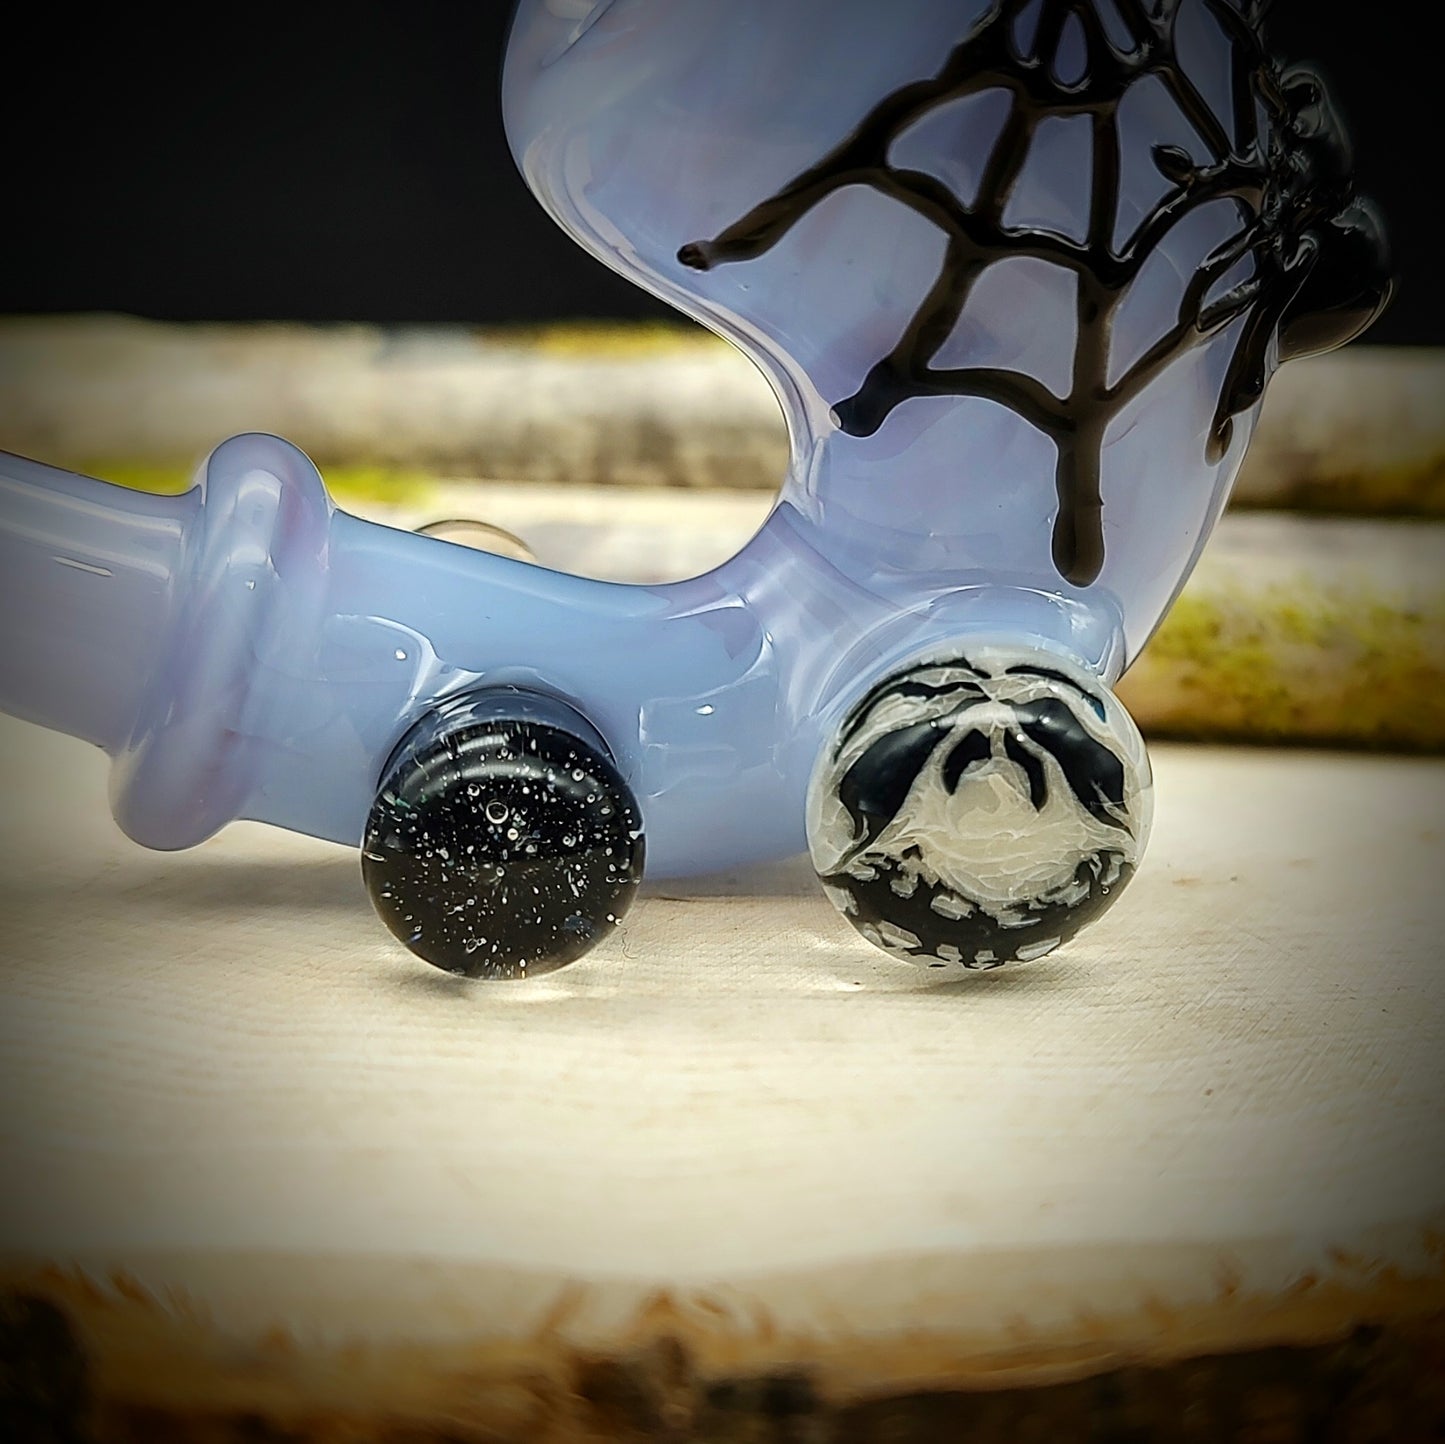 Spider with Web Sherlock (Ready To Ship)